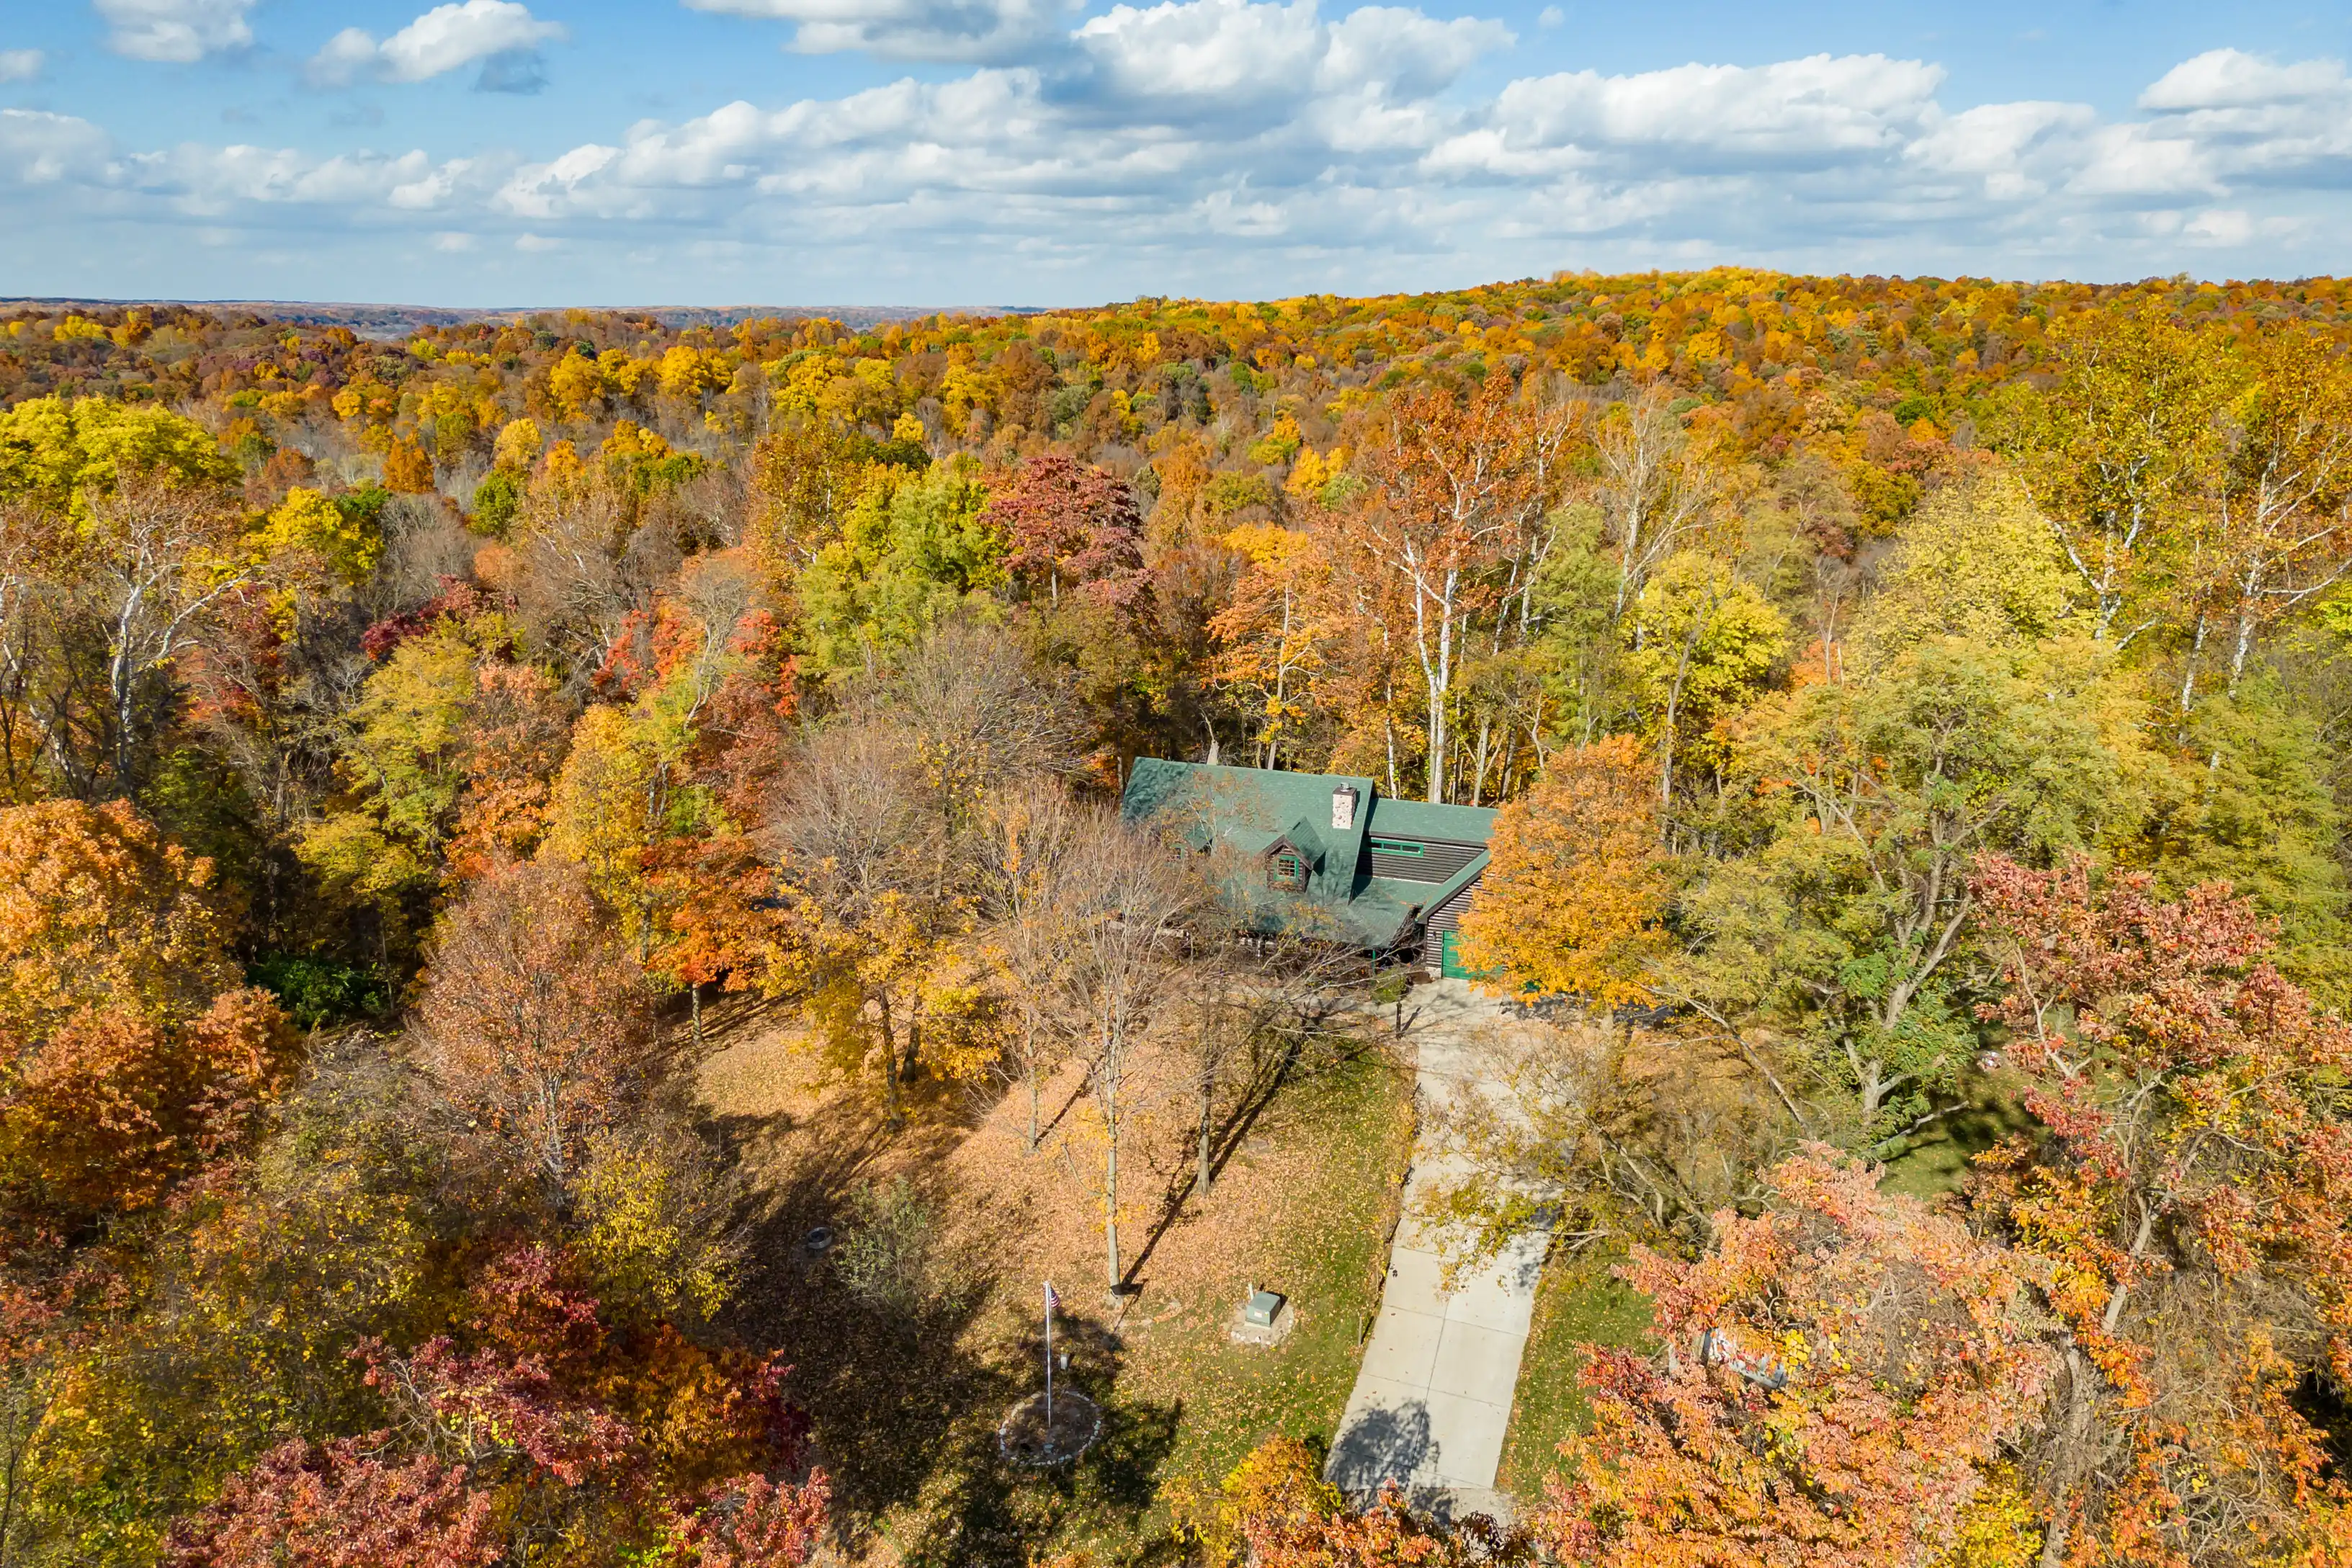 Aerial view of a forest in autumn with a variety of colorful trees and a cabin nestled among them.